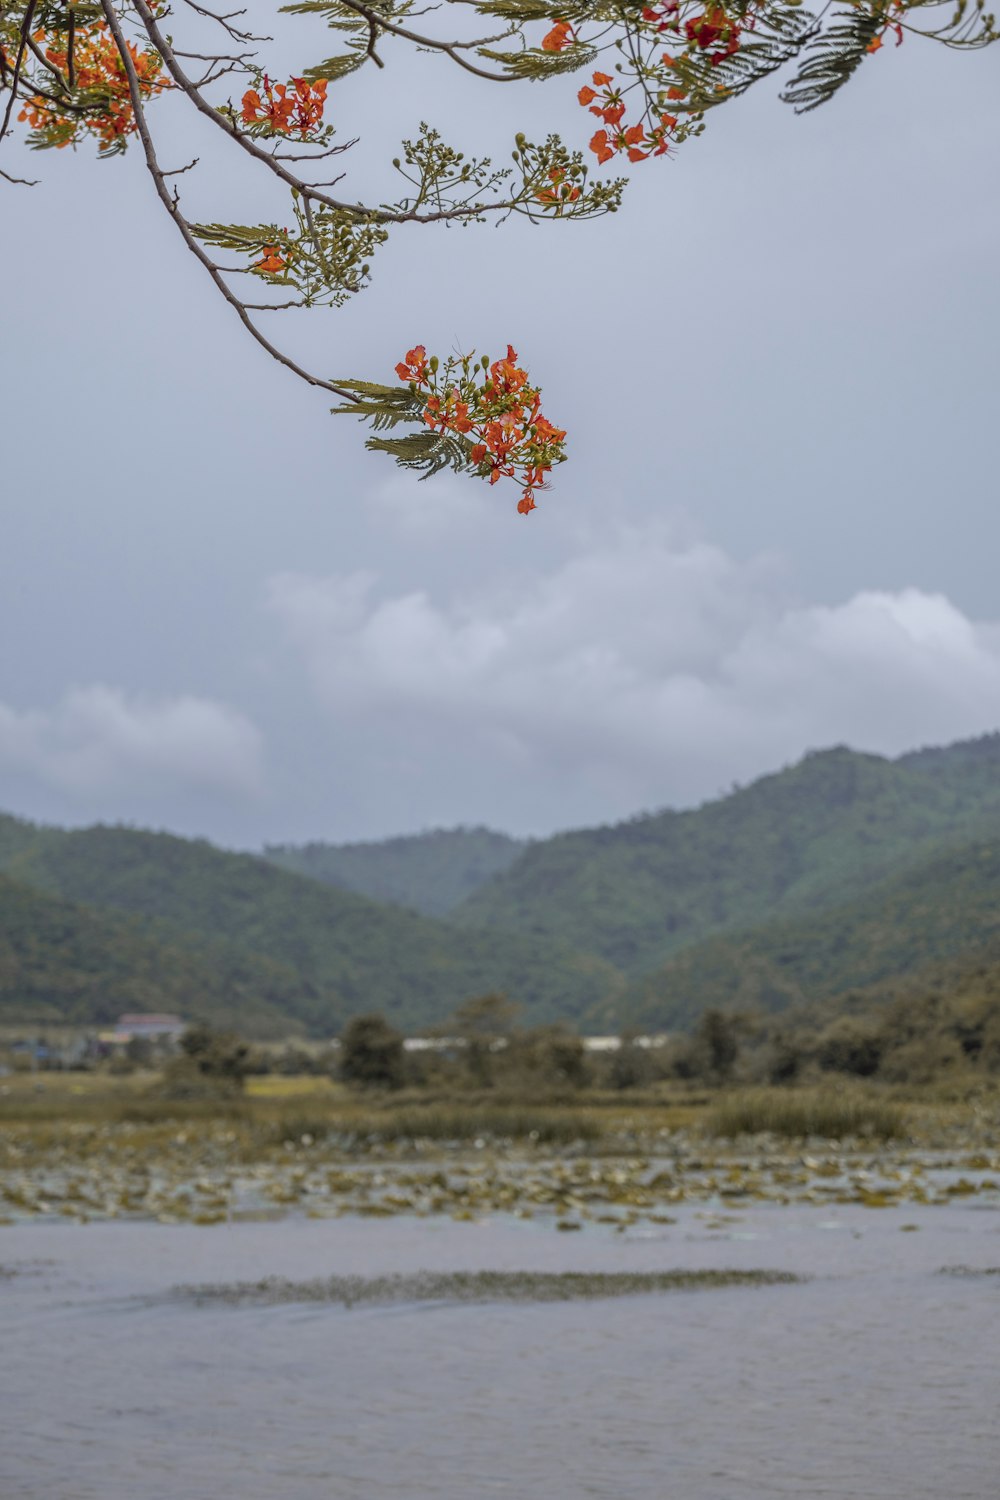 a tree branch with red flowers in front of a body of water